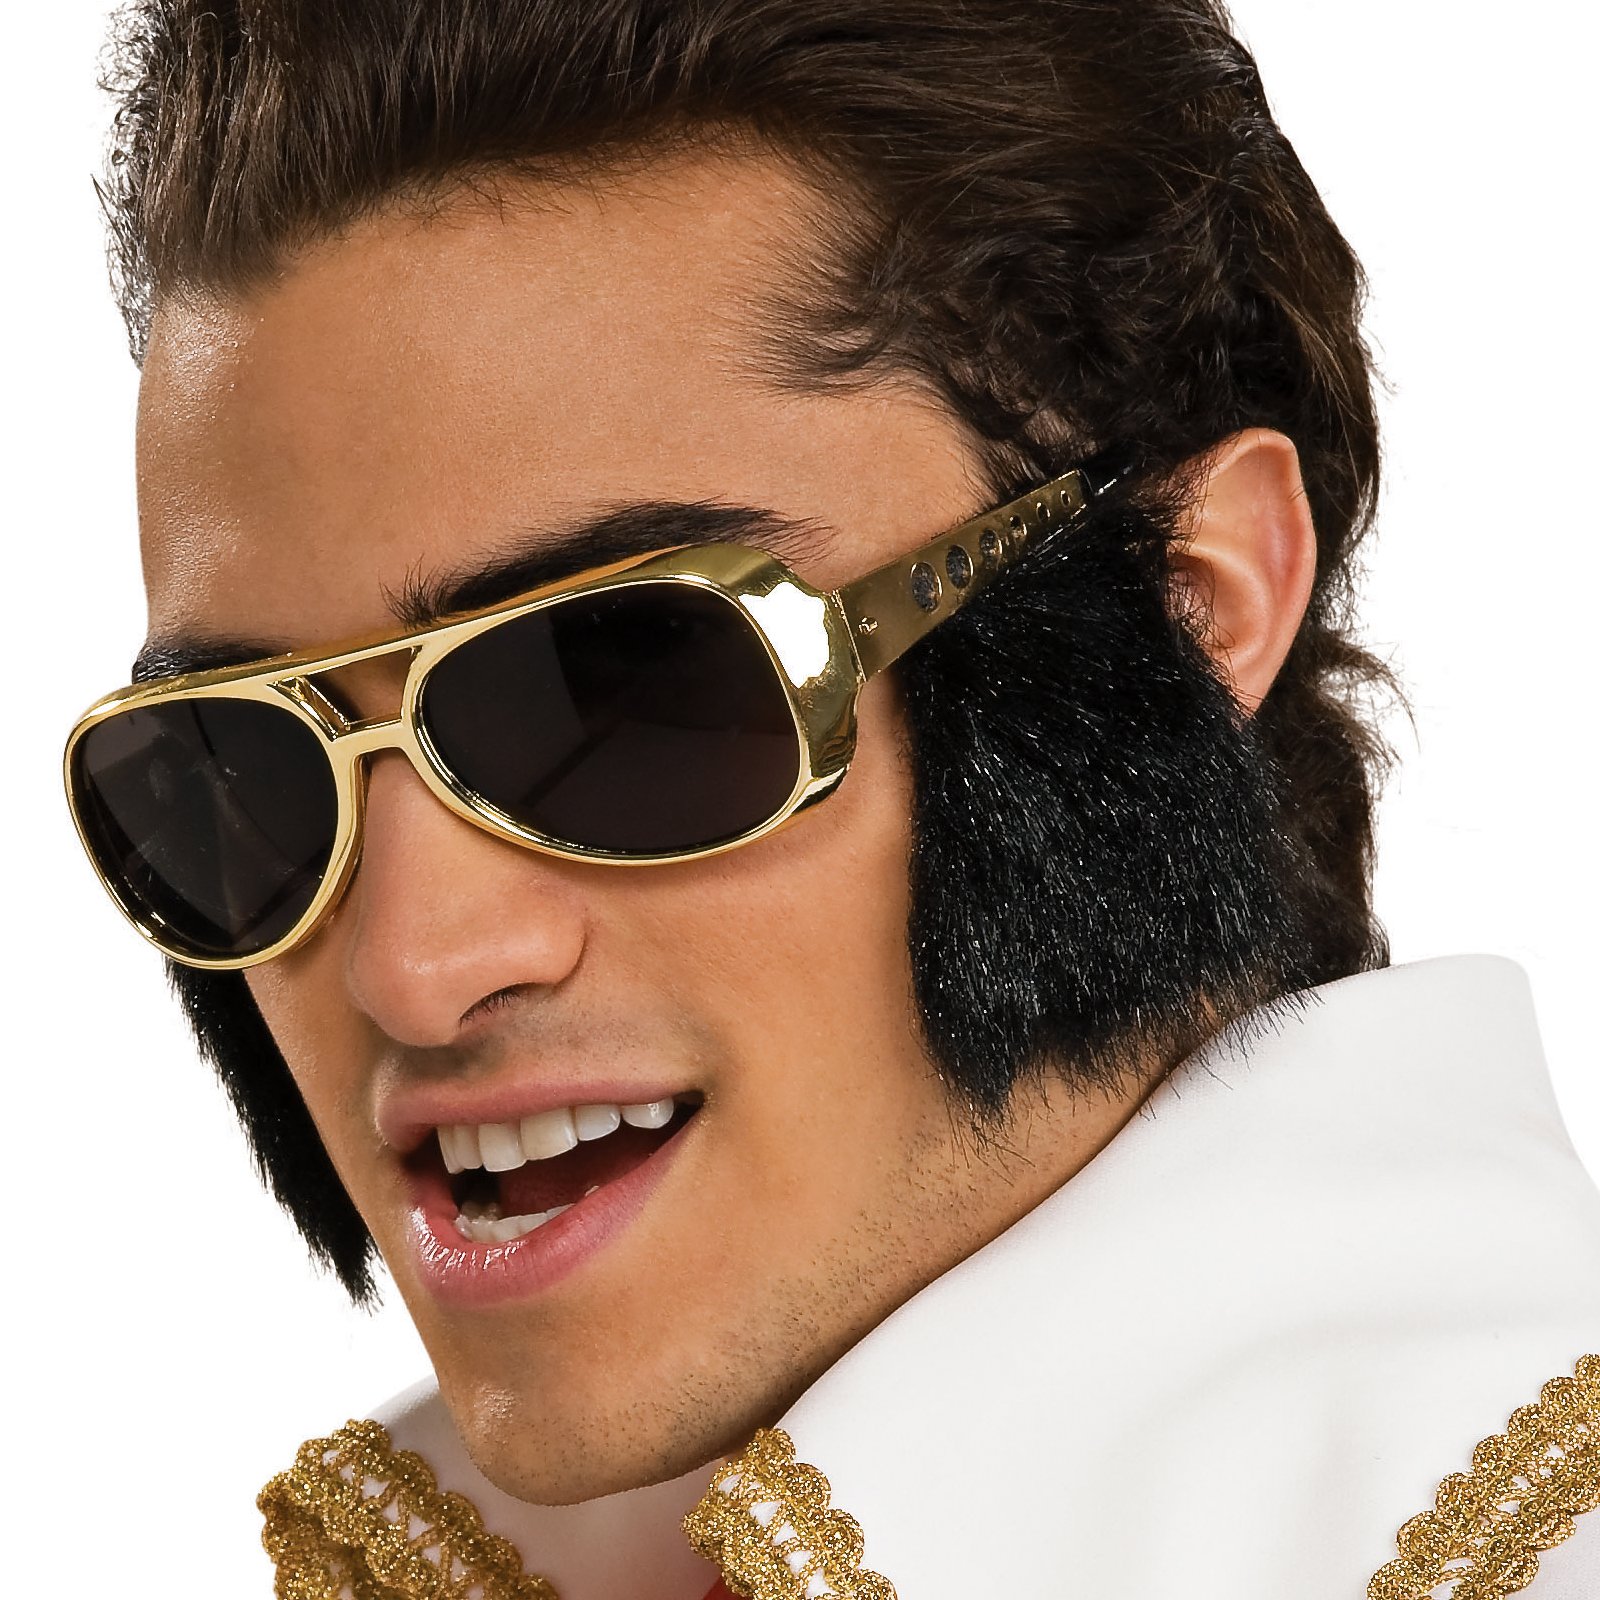 A167 50's Elvis Rock and Roll Gold Glasses with Sideburns Costume Accessory